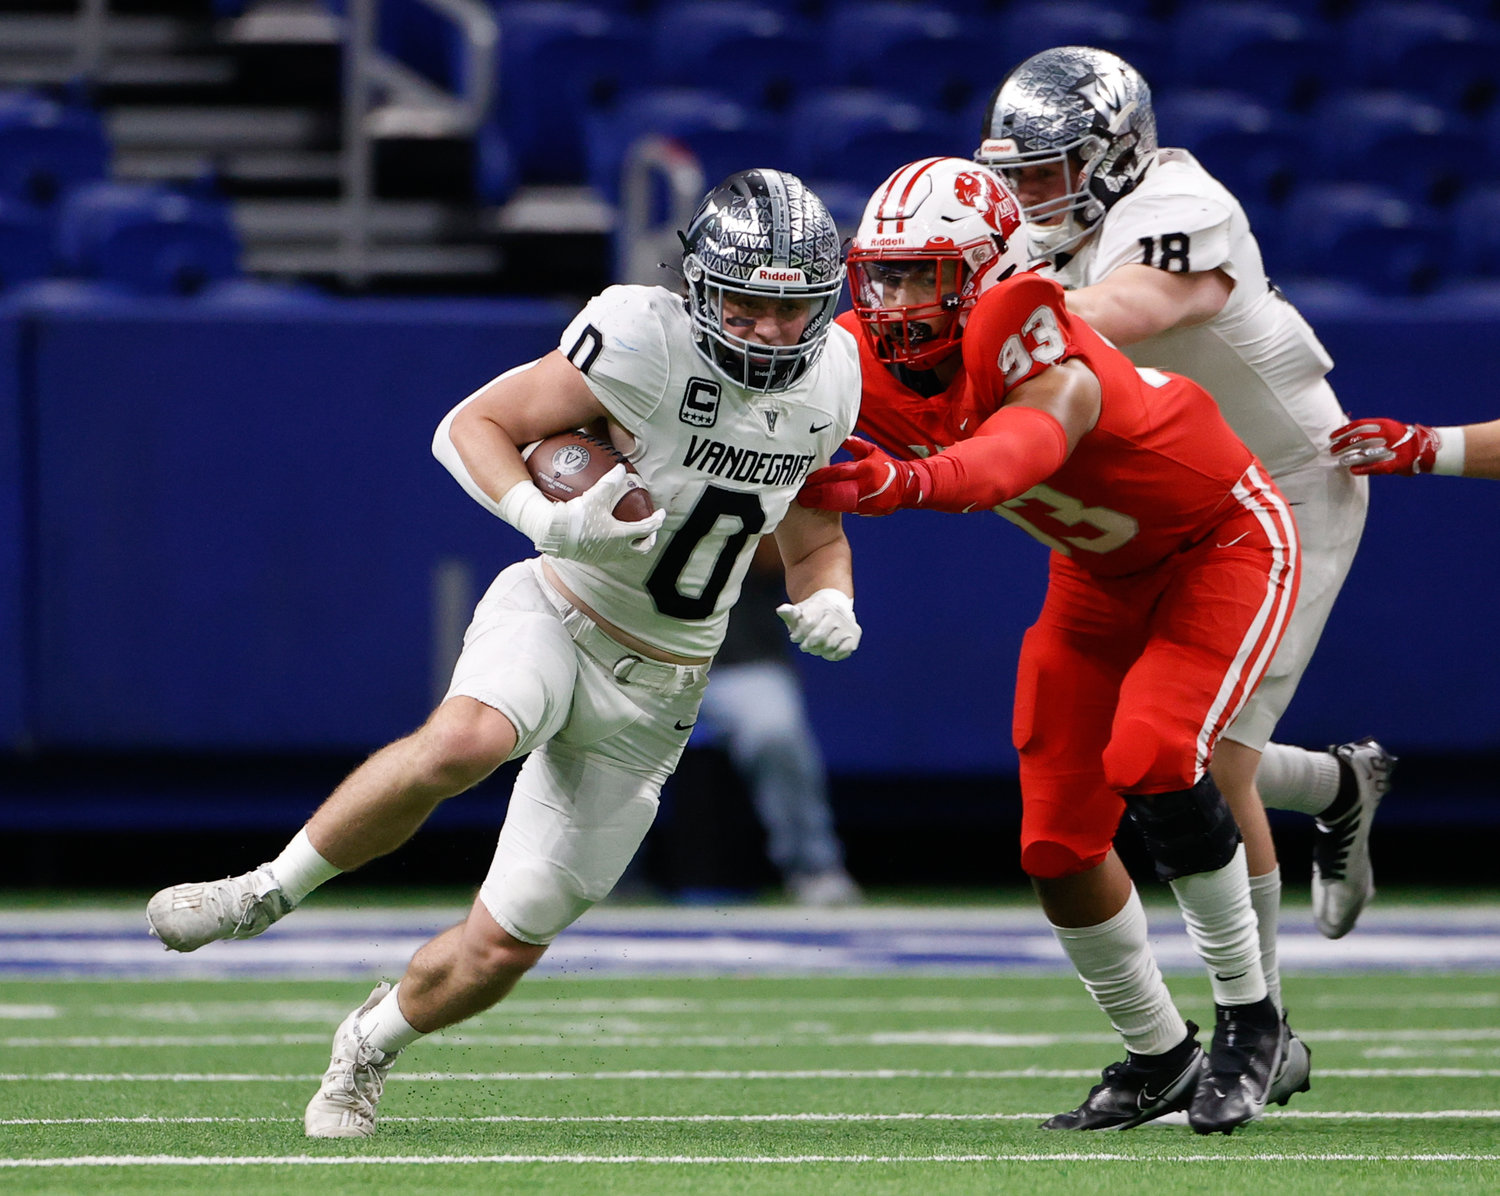 Vandegrift Vipers senior running back Alex Witt (0) carries the ball during the Class 6A-DII state semifinal football game between Katy and Vandegrift on Dec. 10, 2022 in San Antonio.